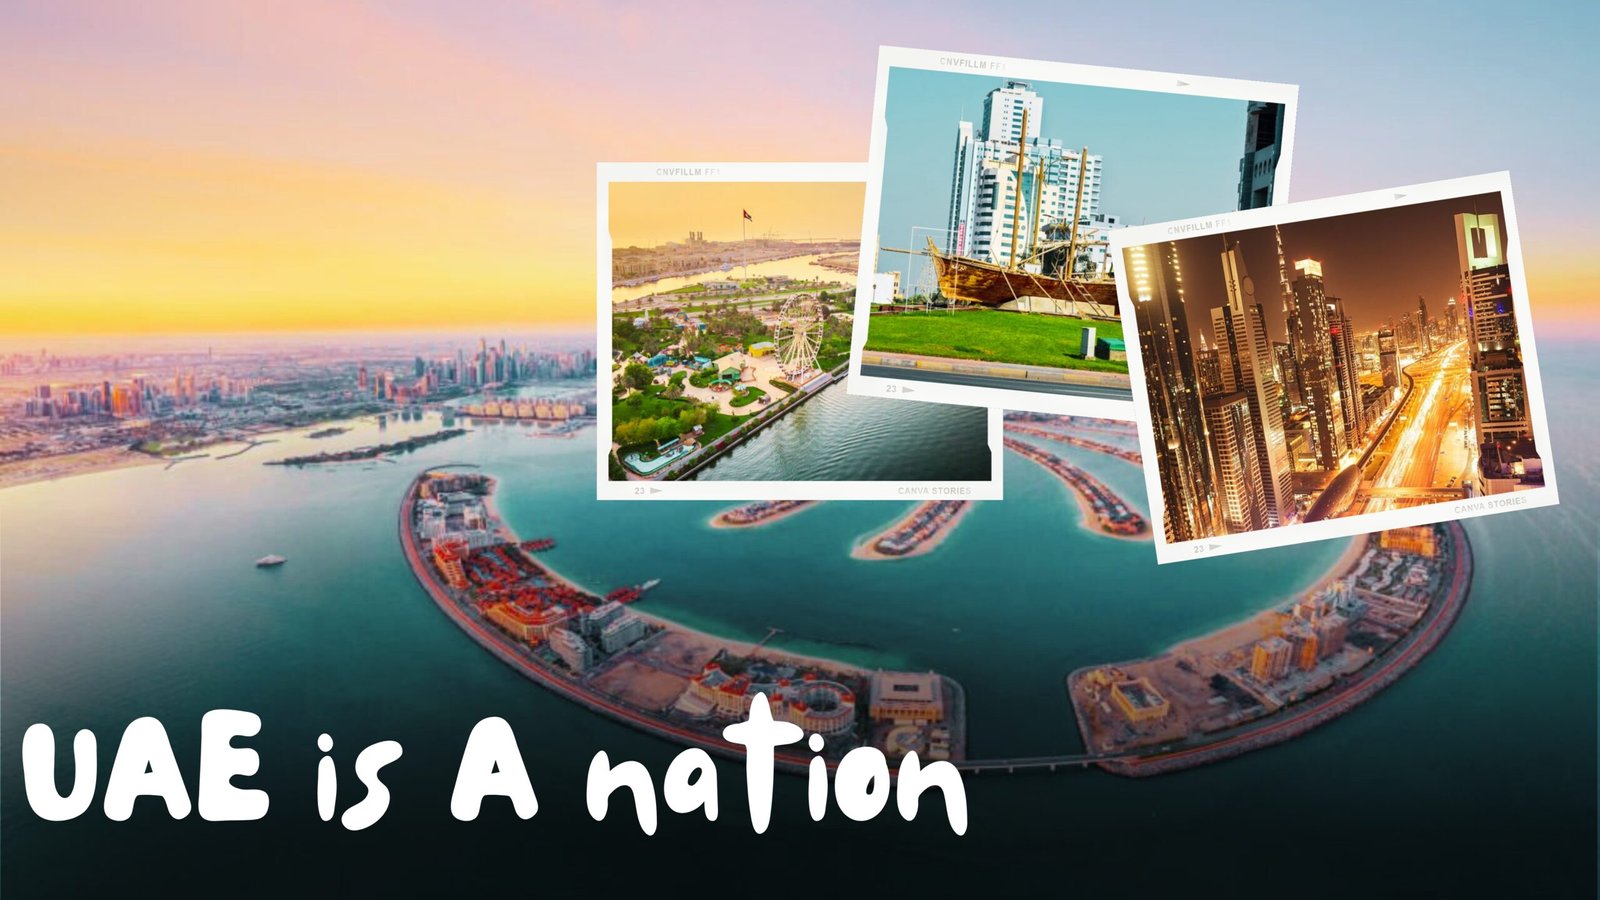 United Arab Emirates is a nation of incredible feats of creation